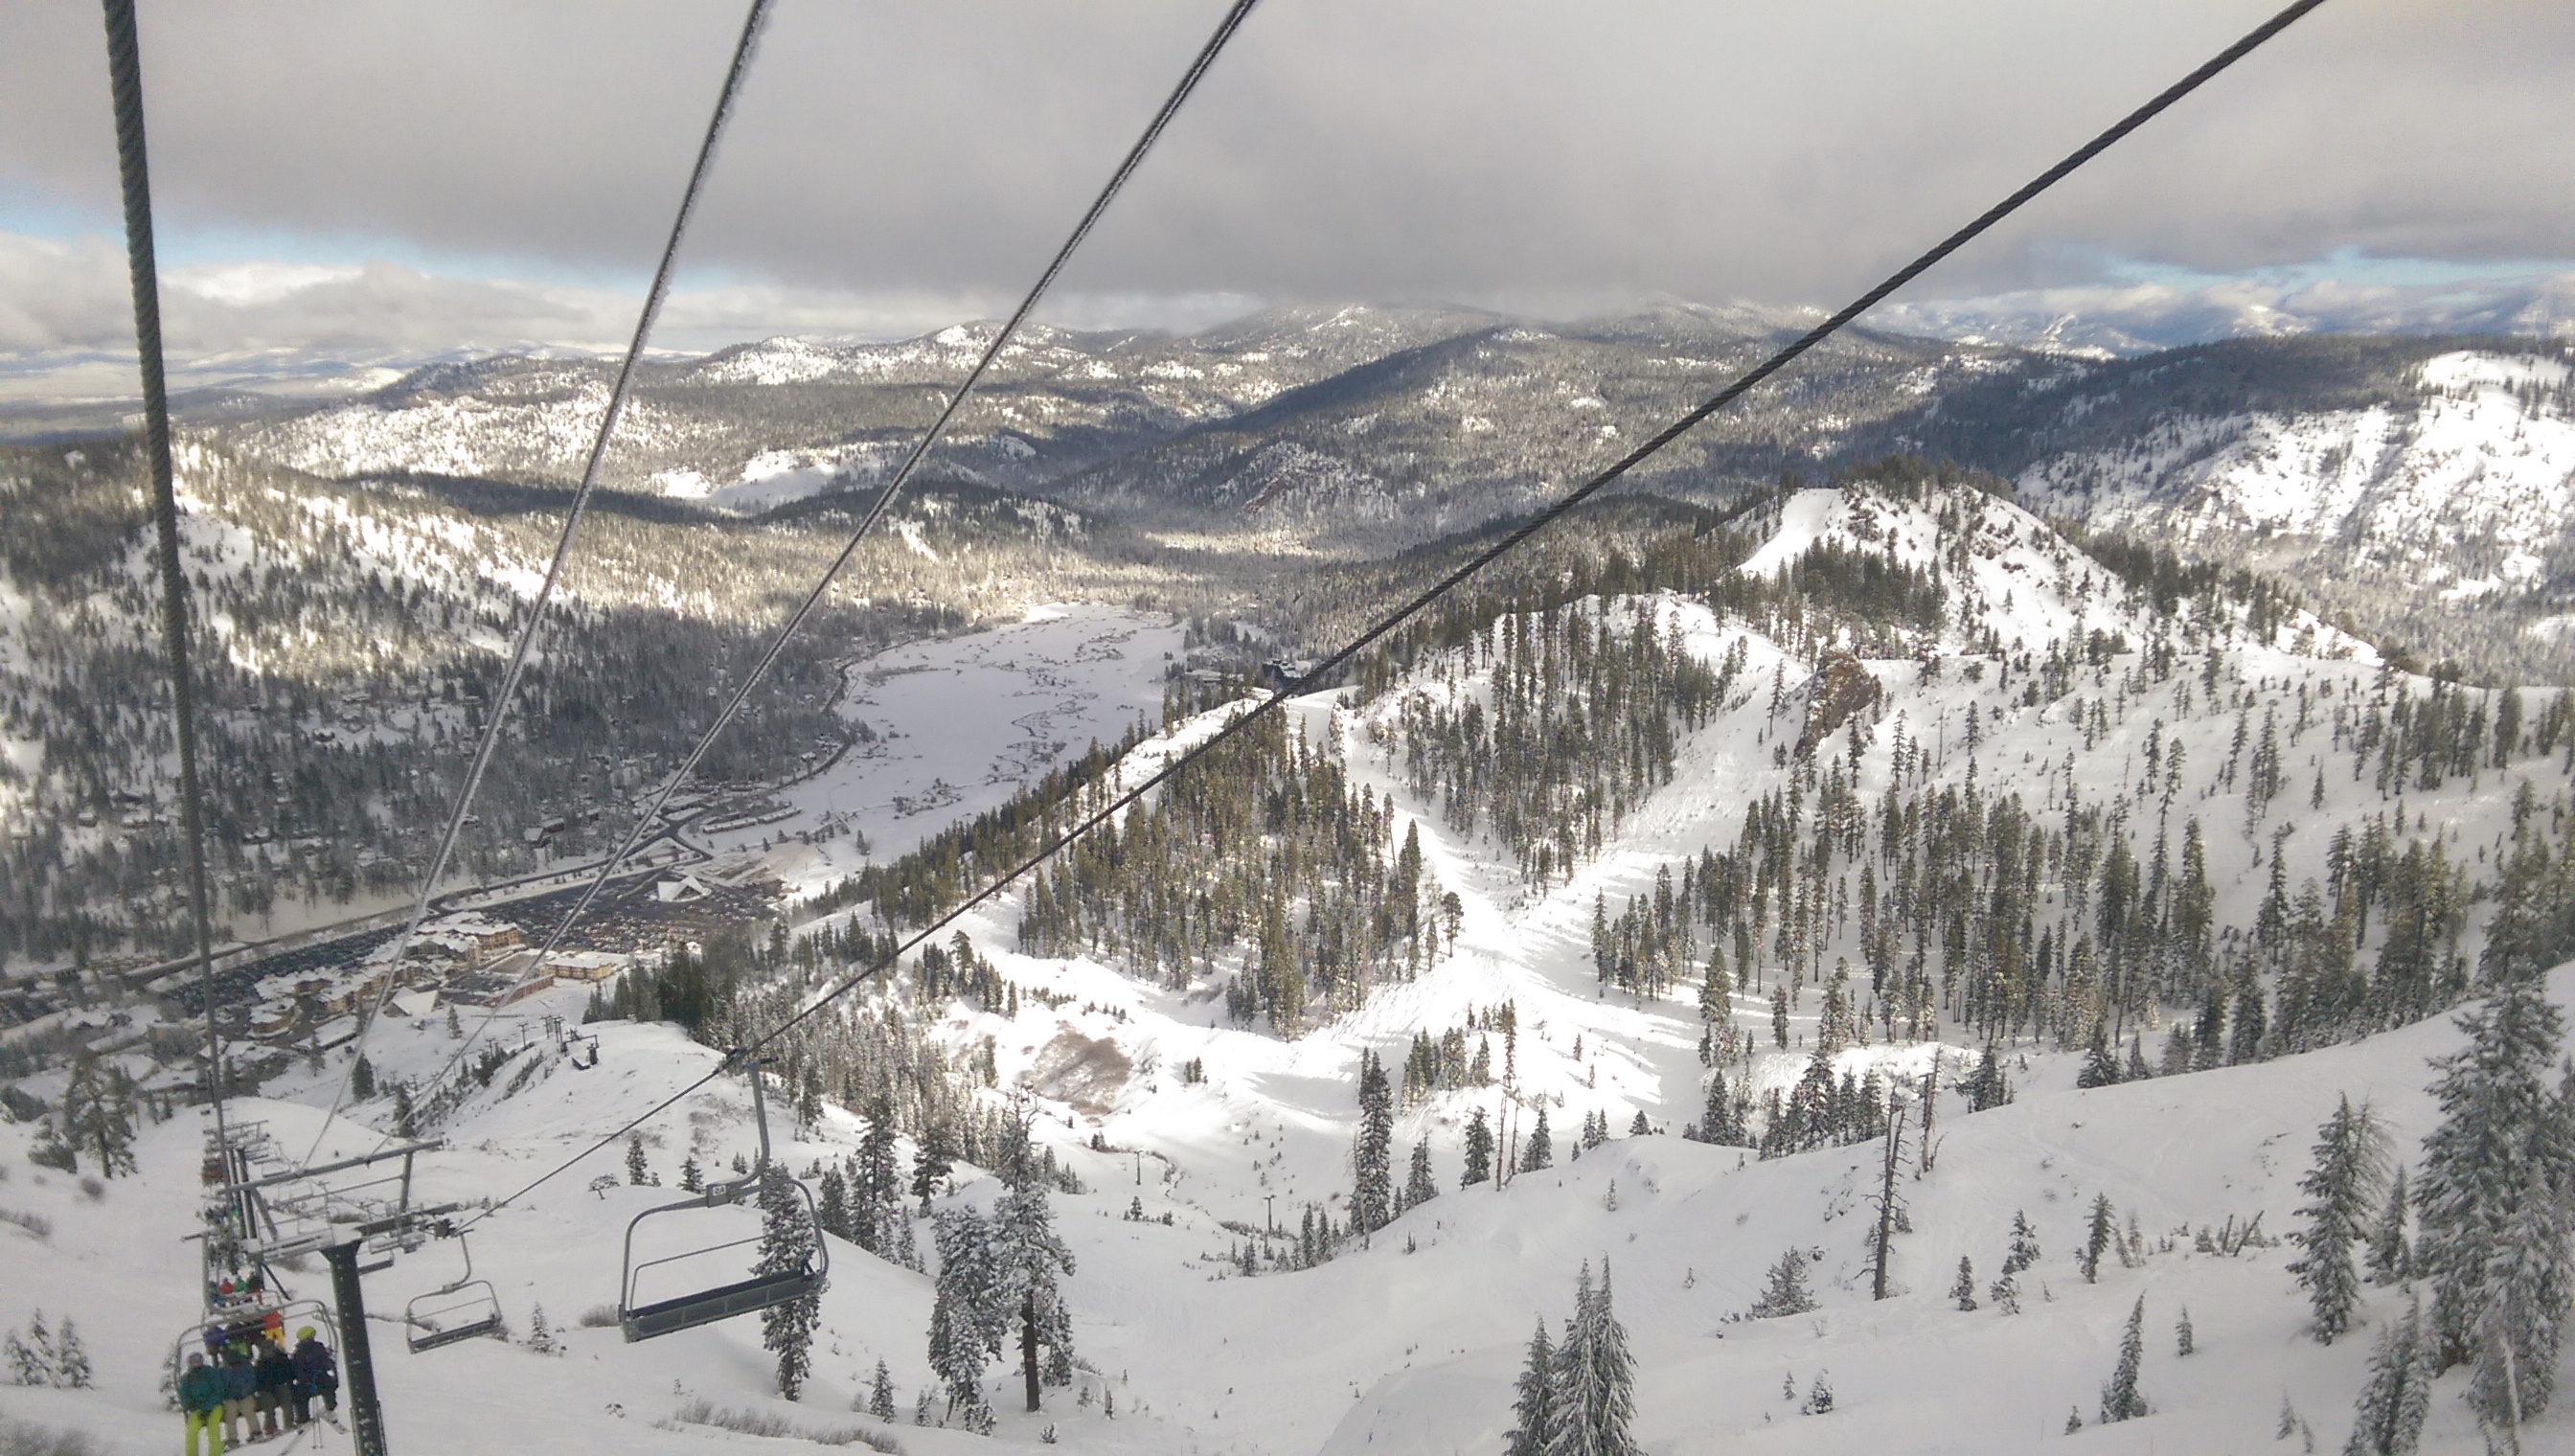 Looking back at Squaw from the top of the Mothership